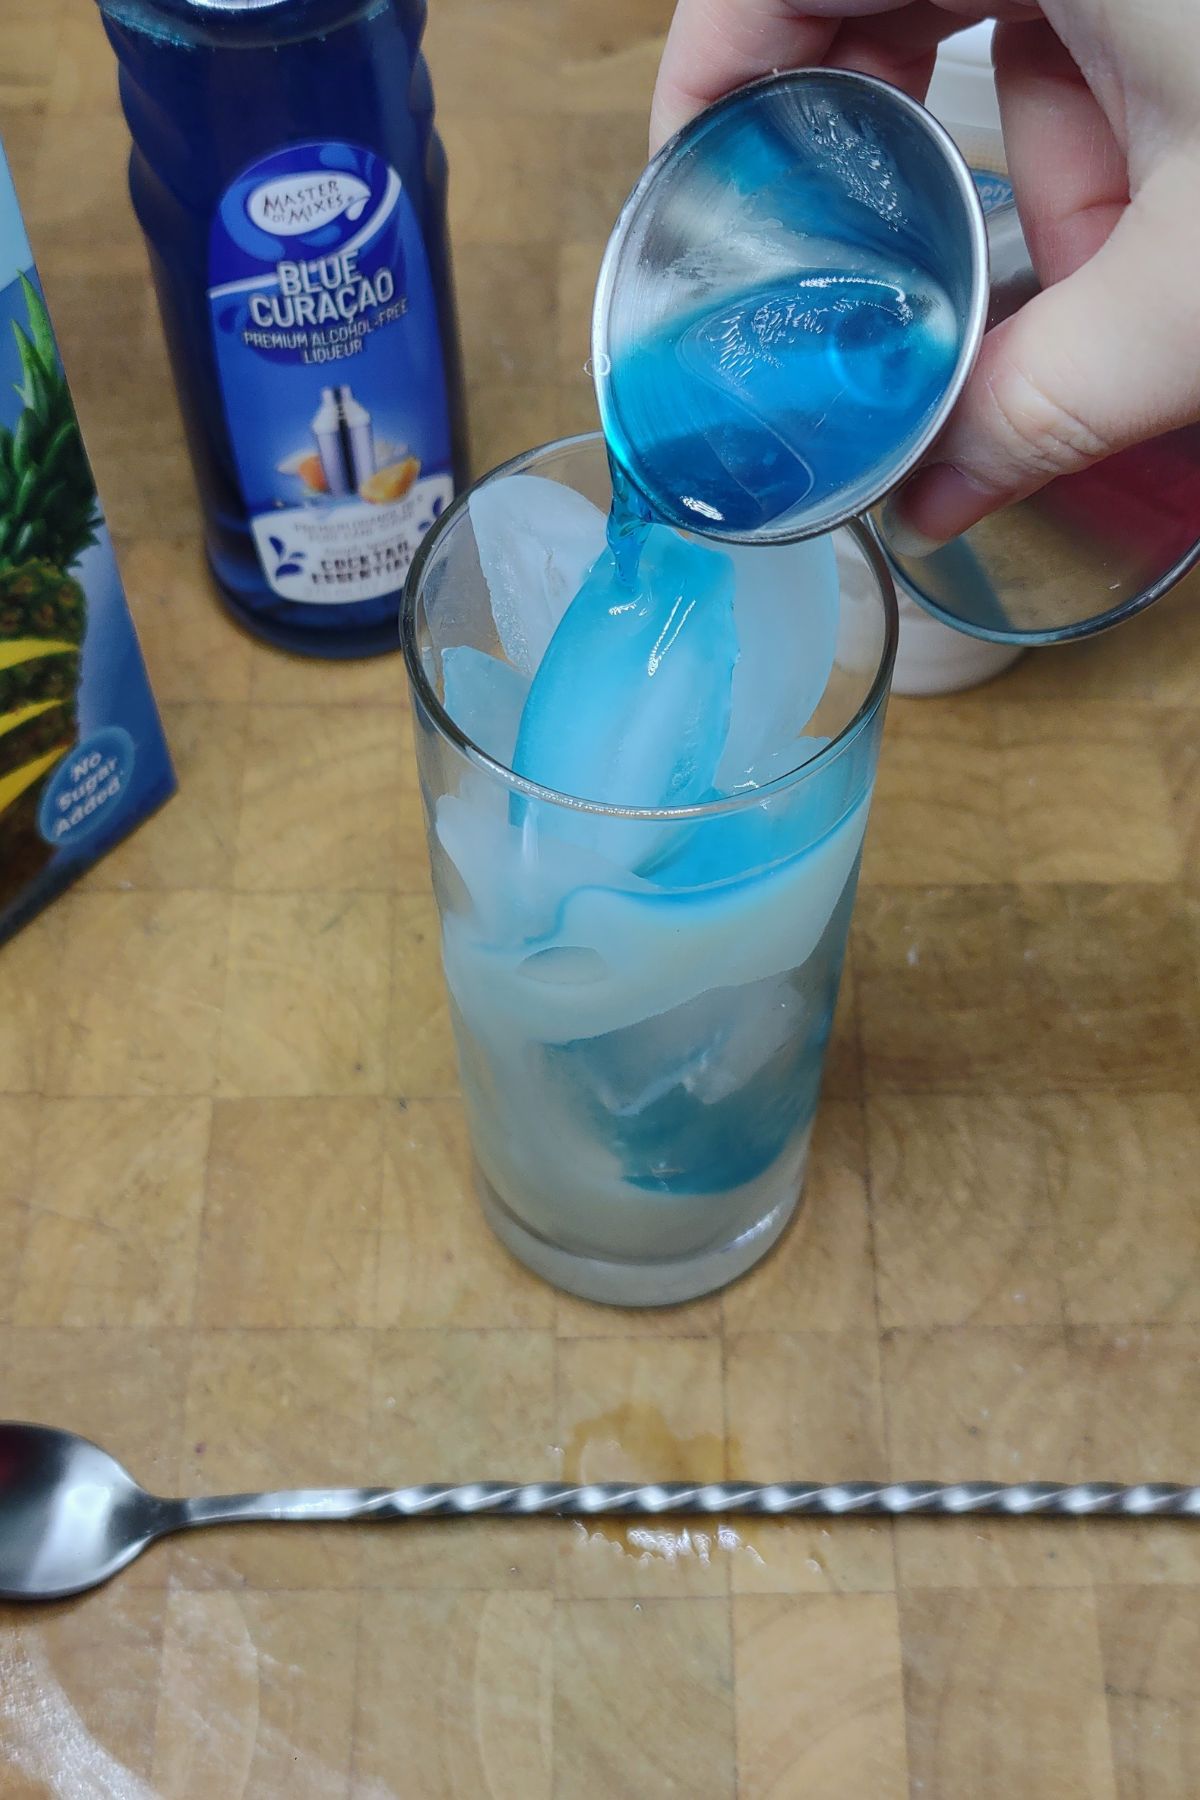 Pouring blue curacao into a glass.